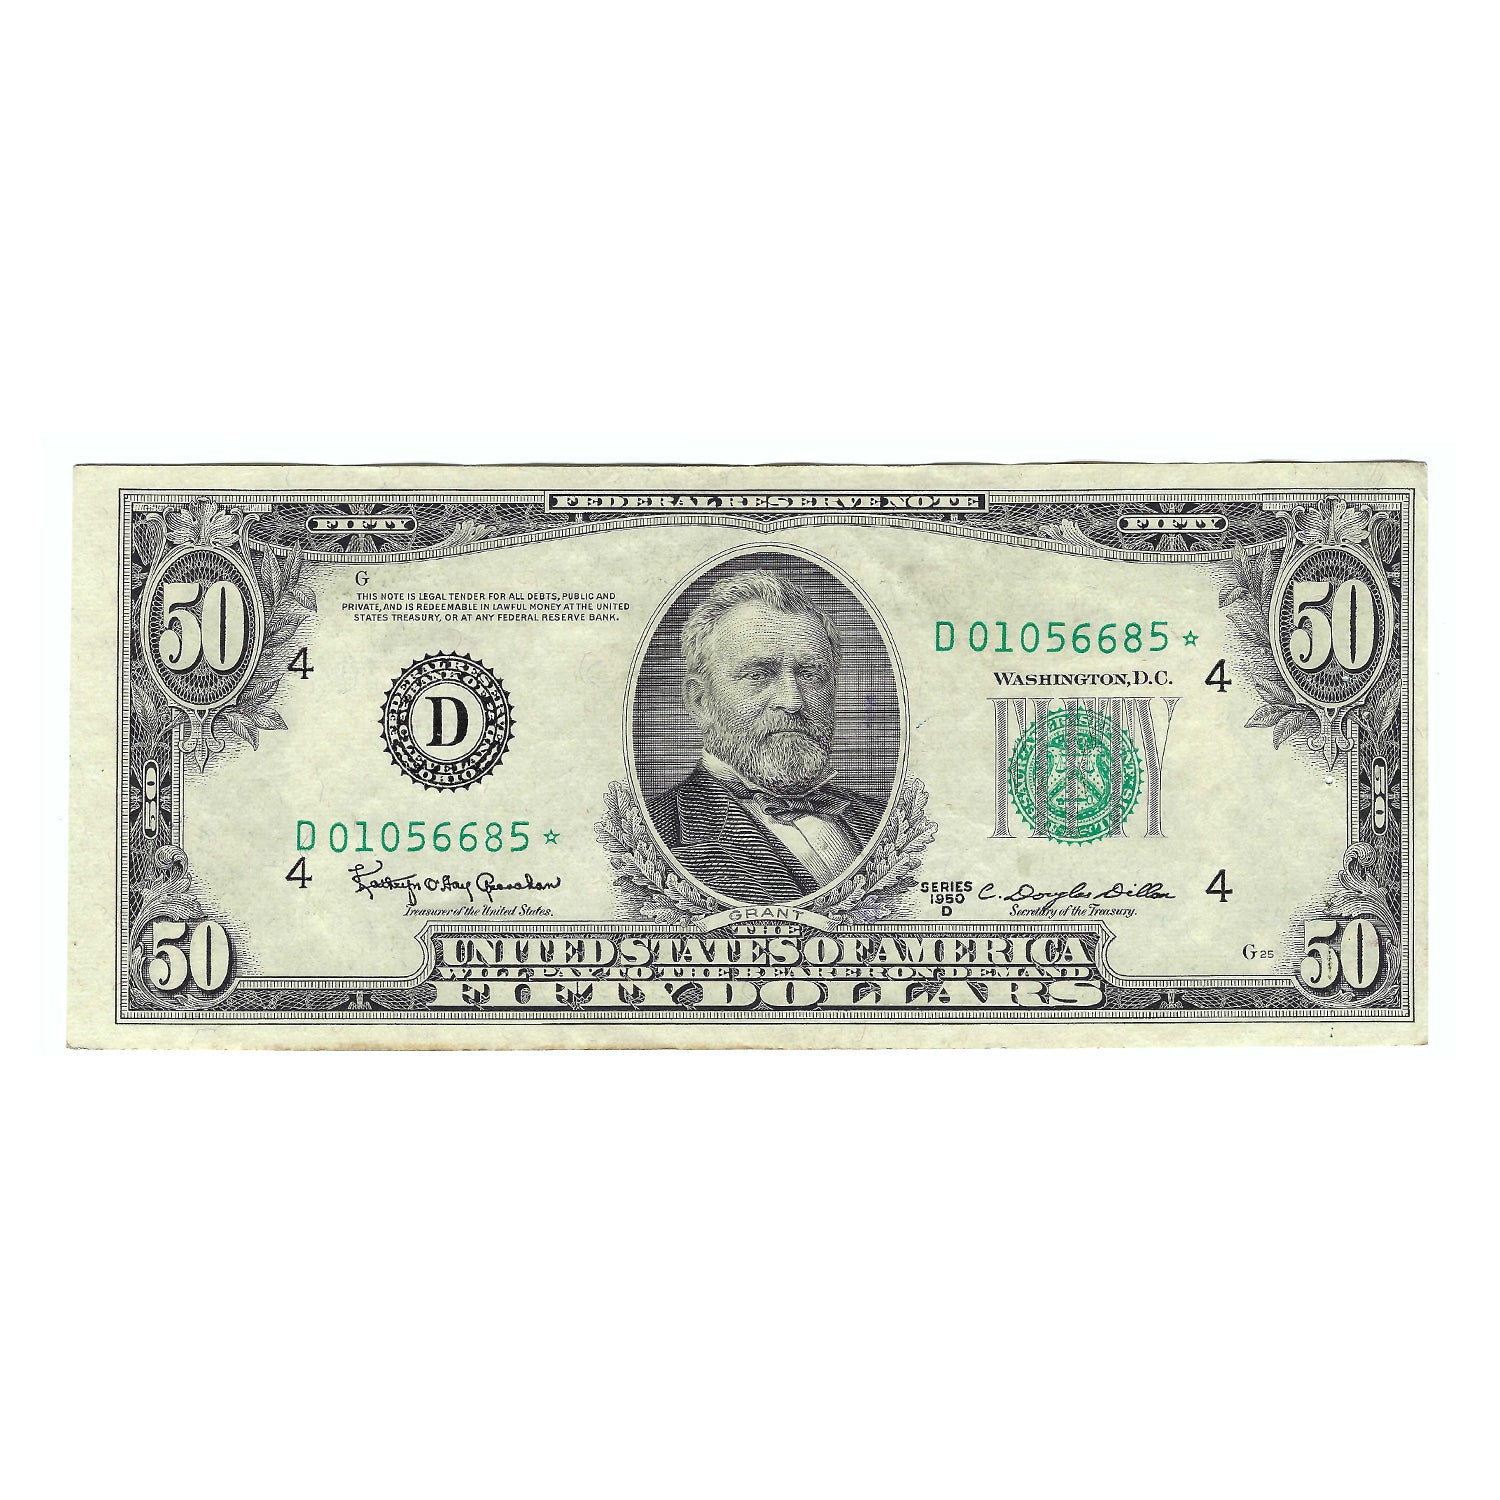 1950-D $50 Small Size Federal Reserve Star Note, Granahan-Dillon, About Uncirculated